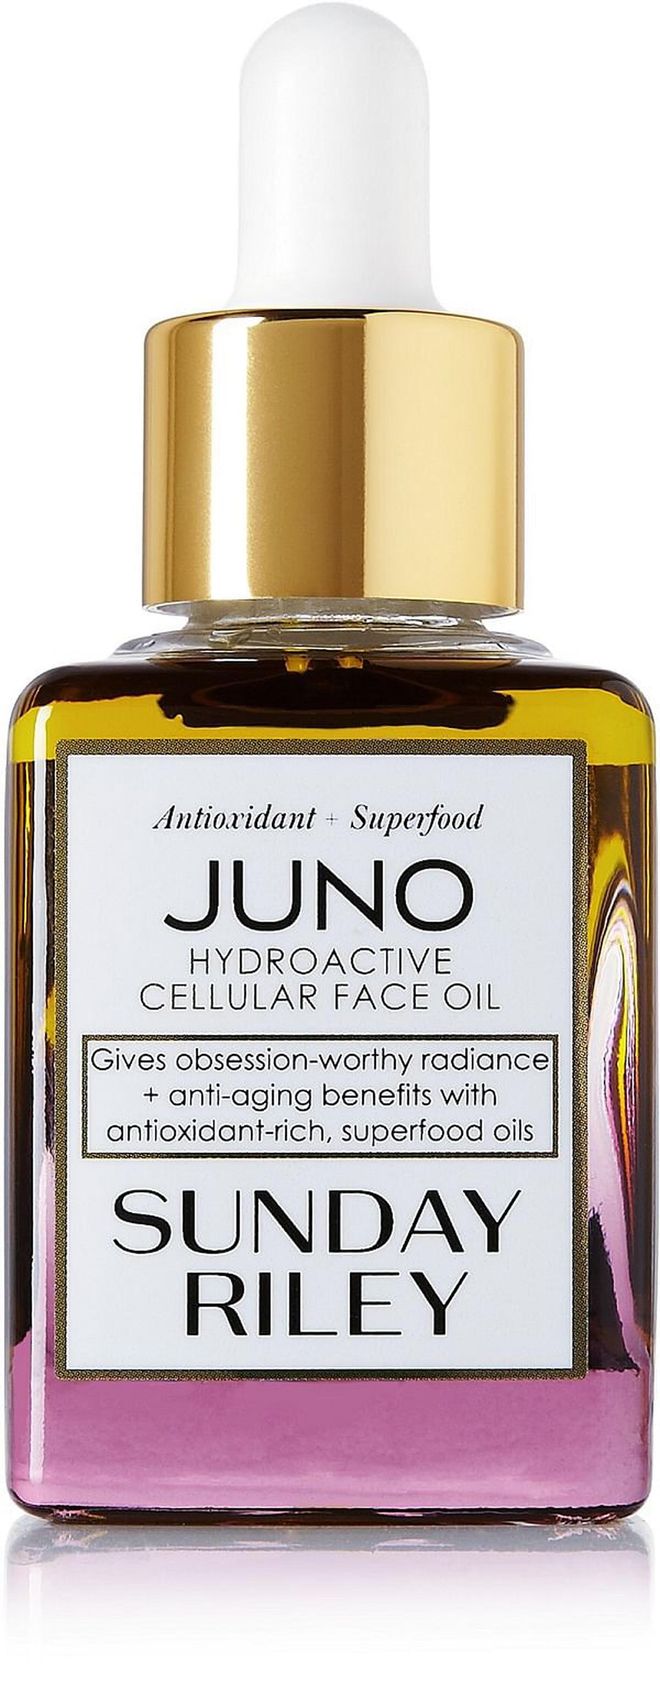 Revive jetlagged complexions with Sunday Riley’s Juno Hydroactive Cellular Face Oil, which contains a host of berry oils.